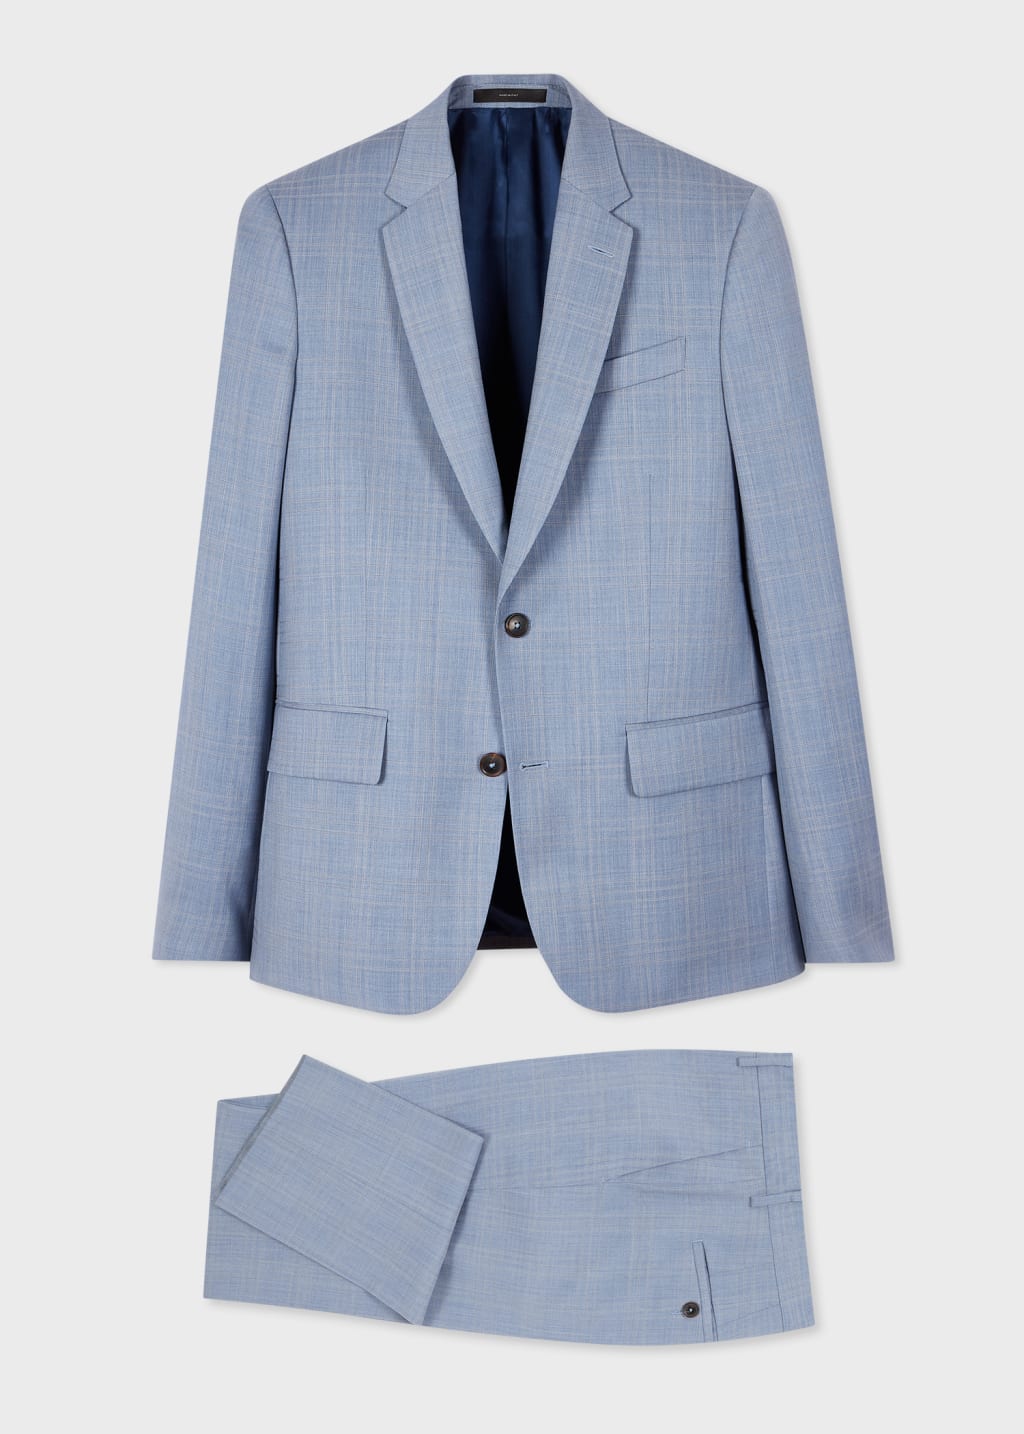 Product view - The Soho - Tailored-Fit Pale Blue Check Wool Suit Paul Smith